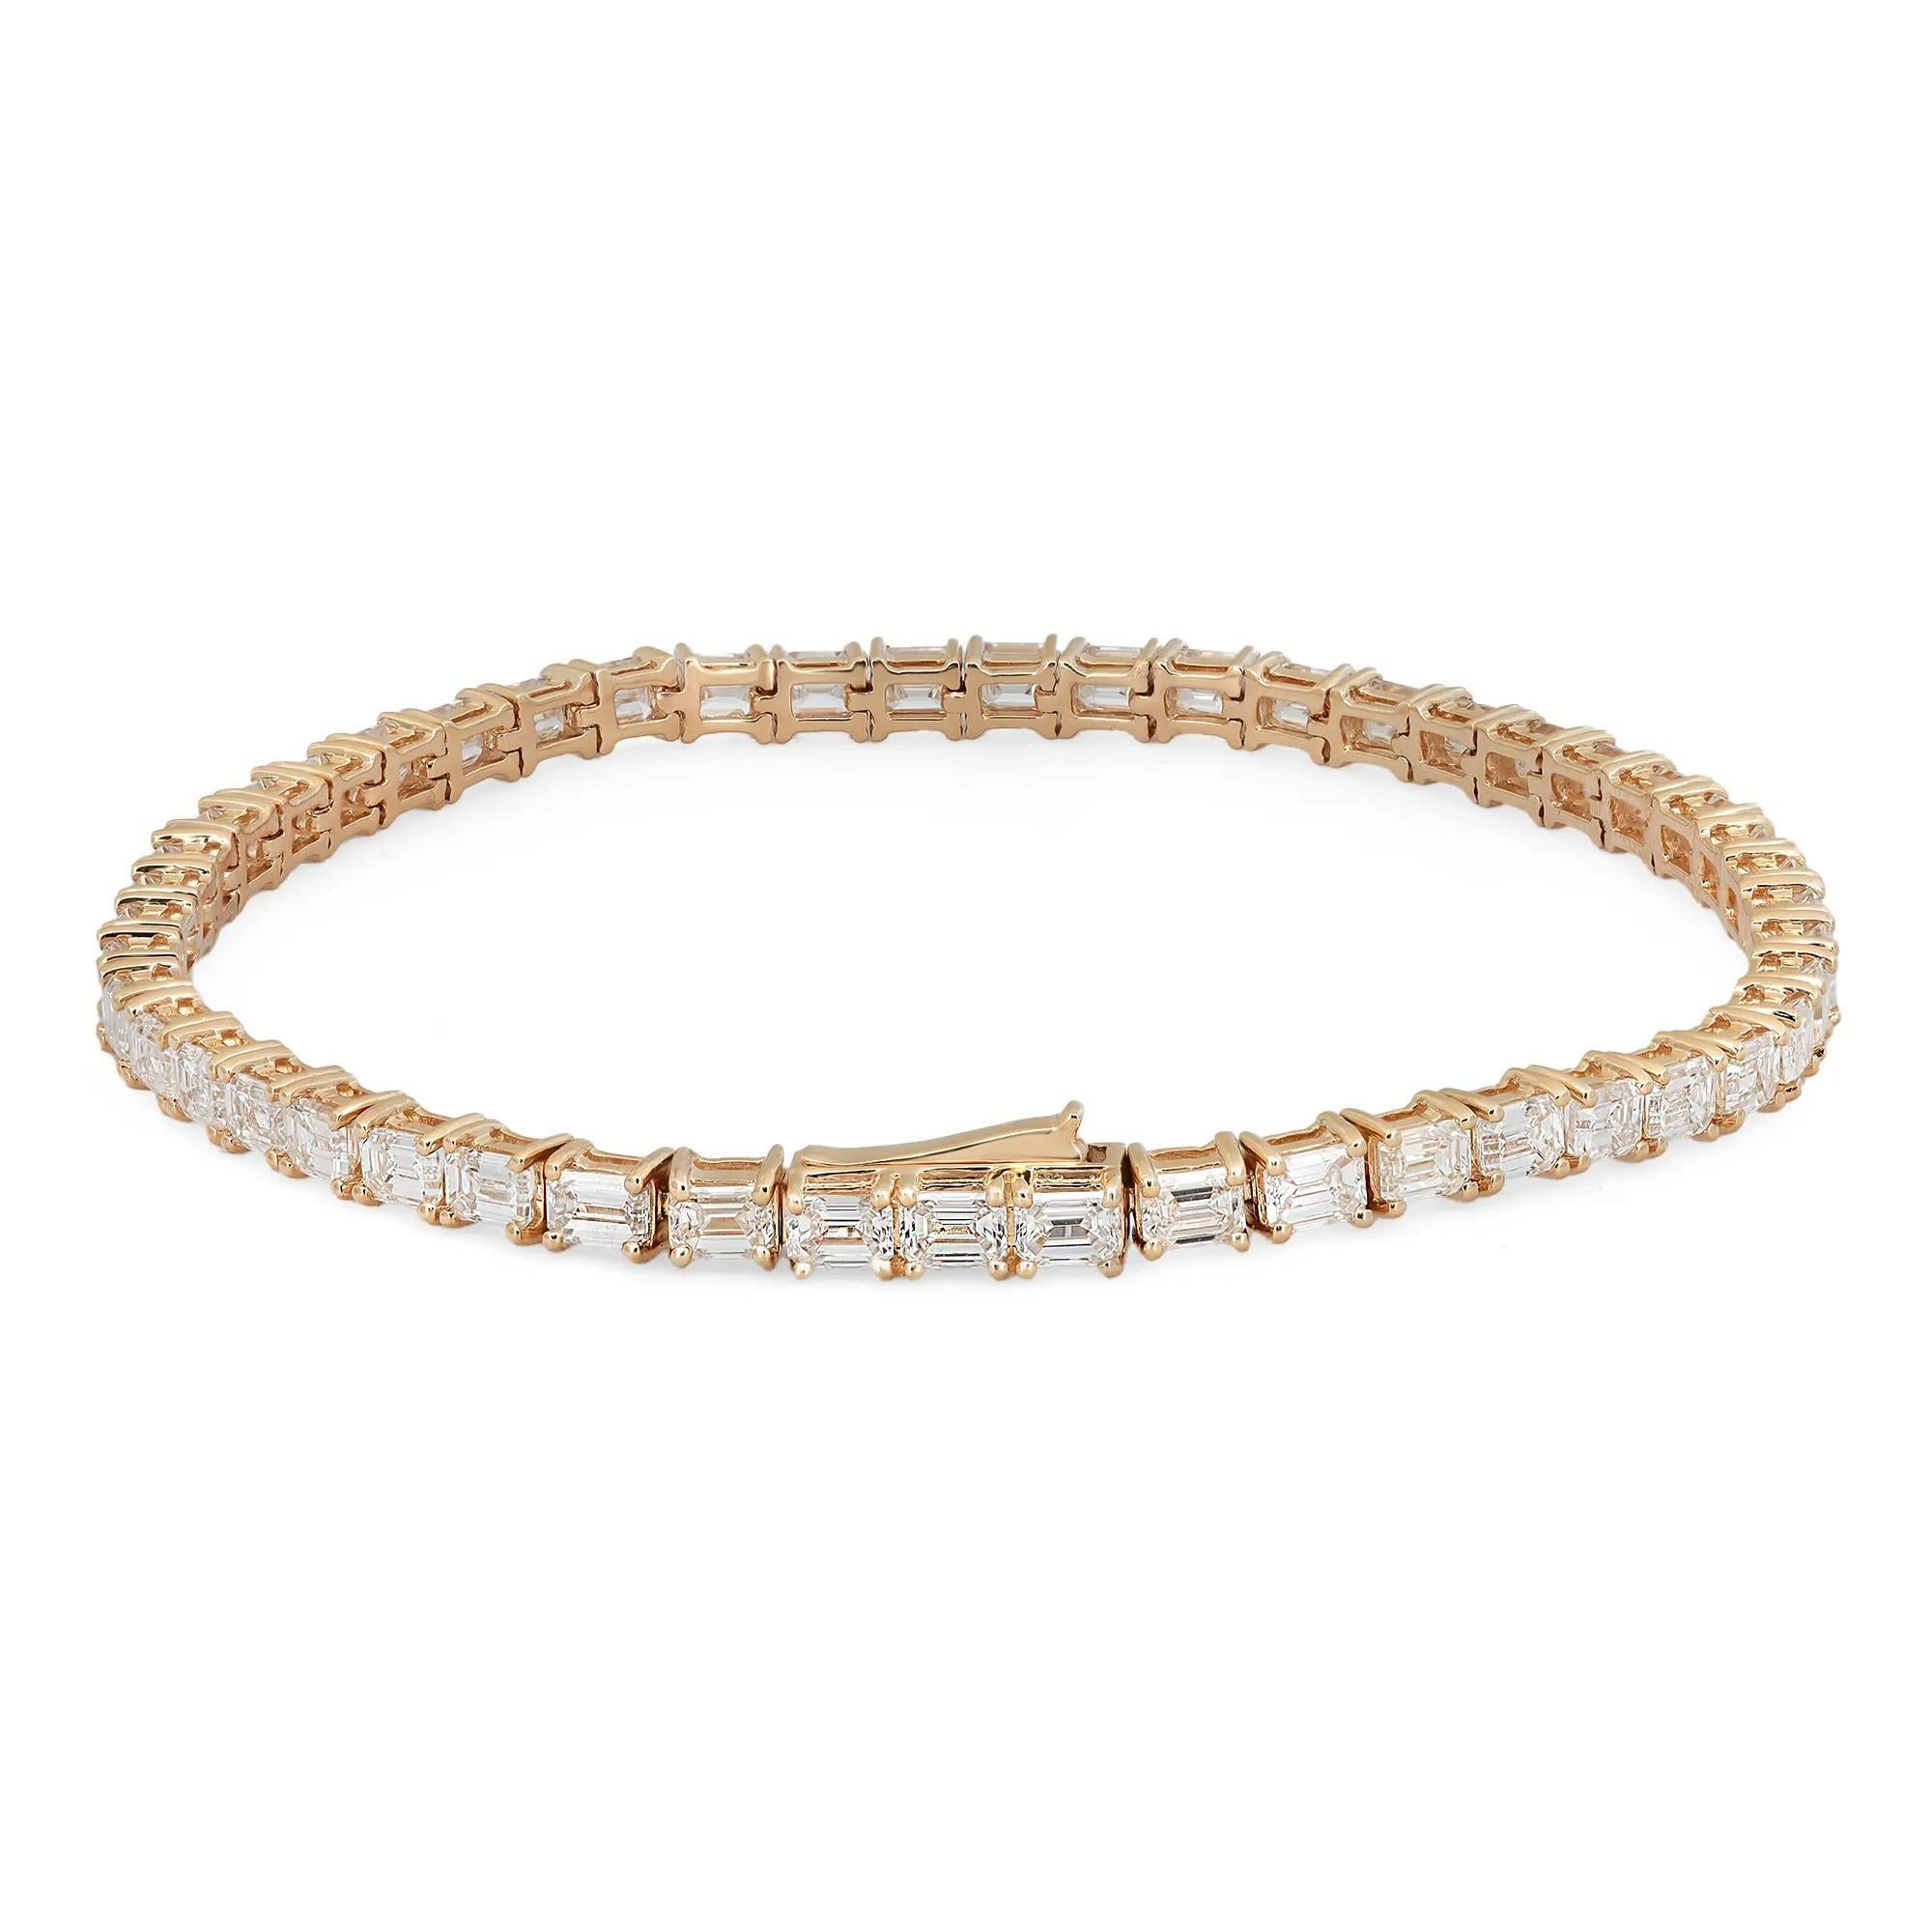 This exquisite Rachael Koen tennis bracelet features single lined emerald cut diamonds in prong setting style crafted in 18k yellow gold. Lightweight and super stackable, this handmade modern creation is a great addition to your jewelry collection.